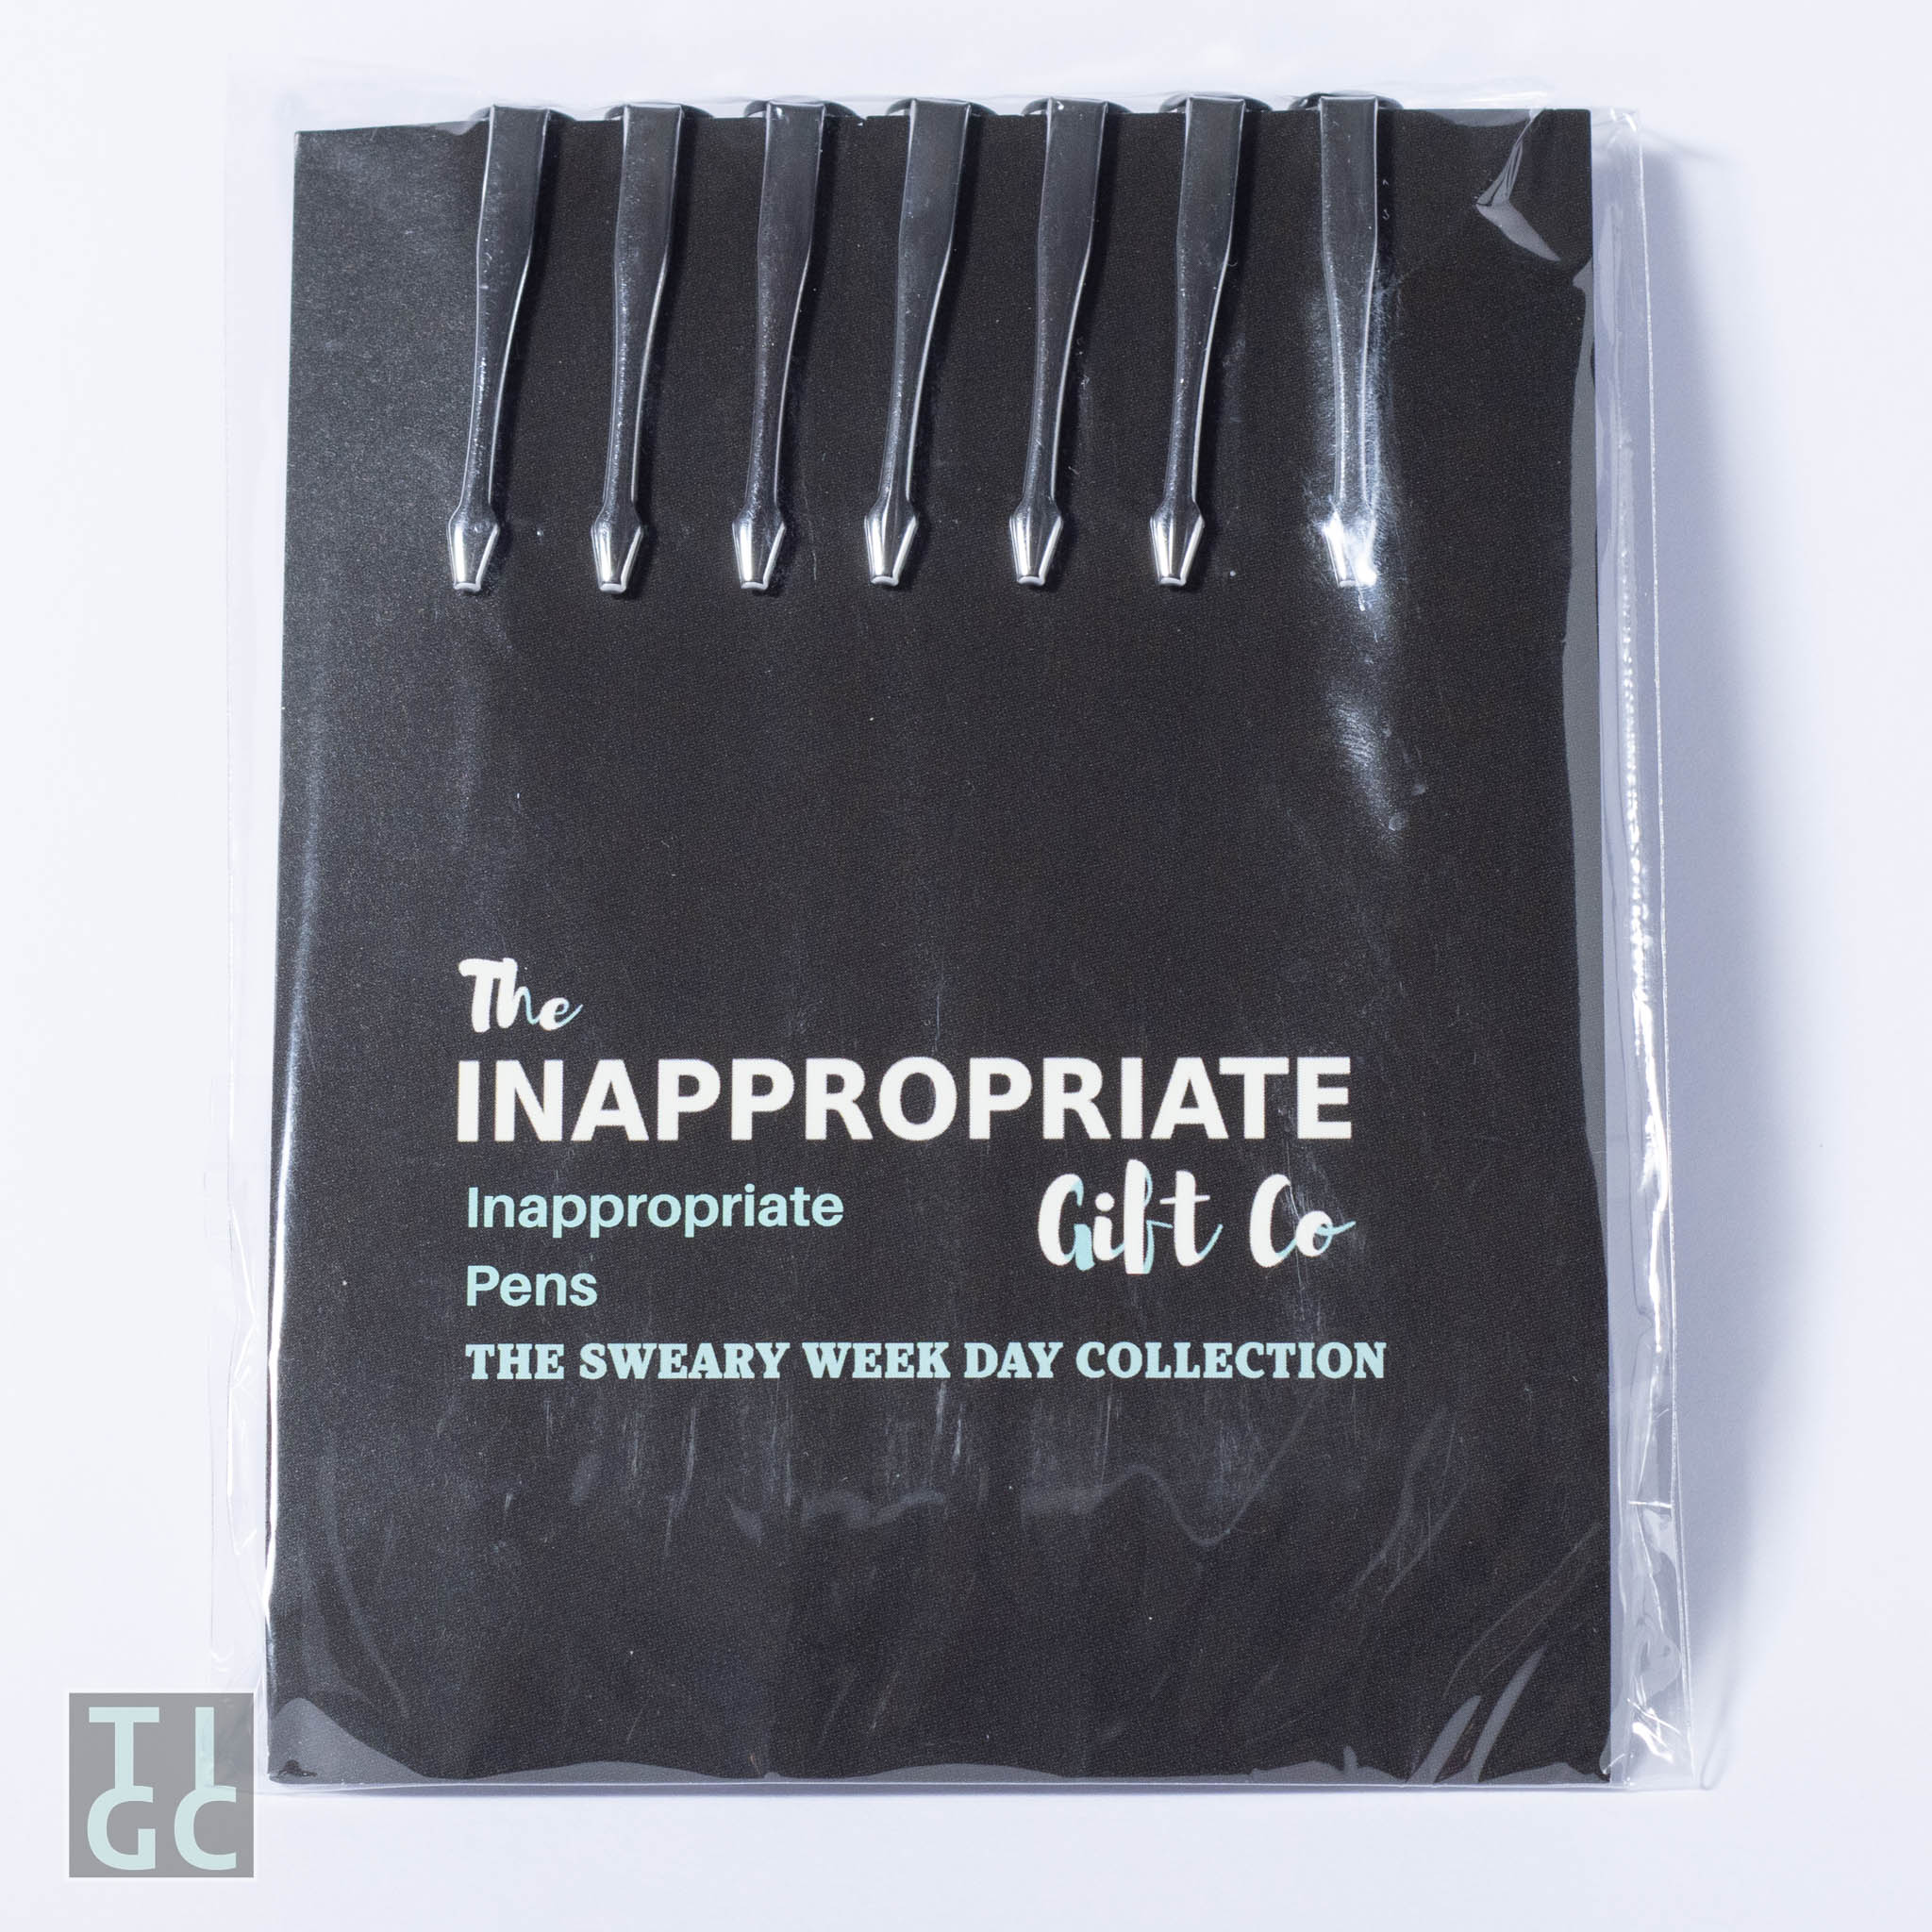 Inappropriate Pens - The Sweary Week Collection - The Inappropriate Gift Co